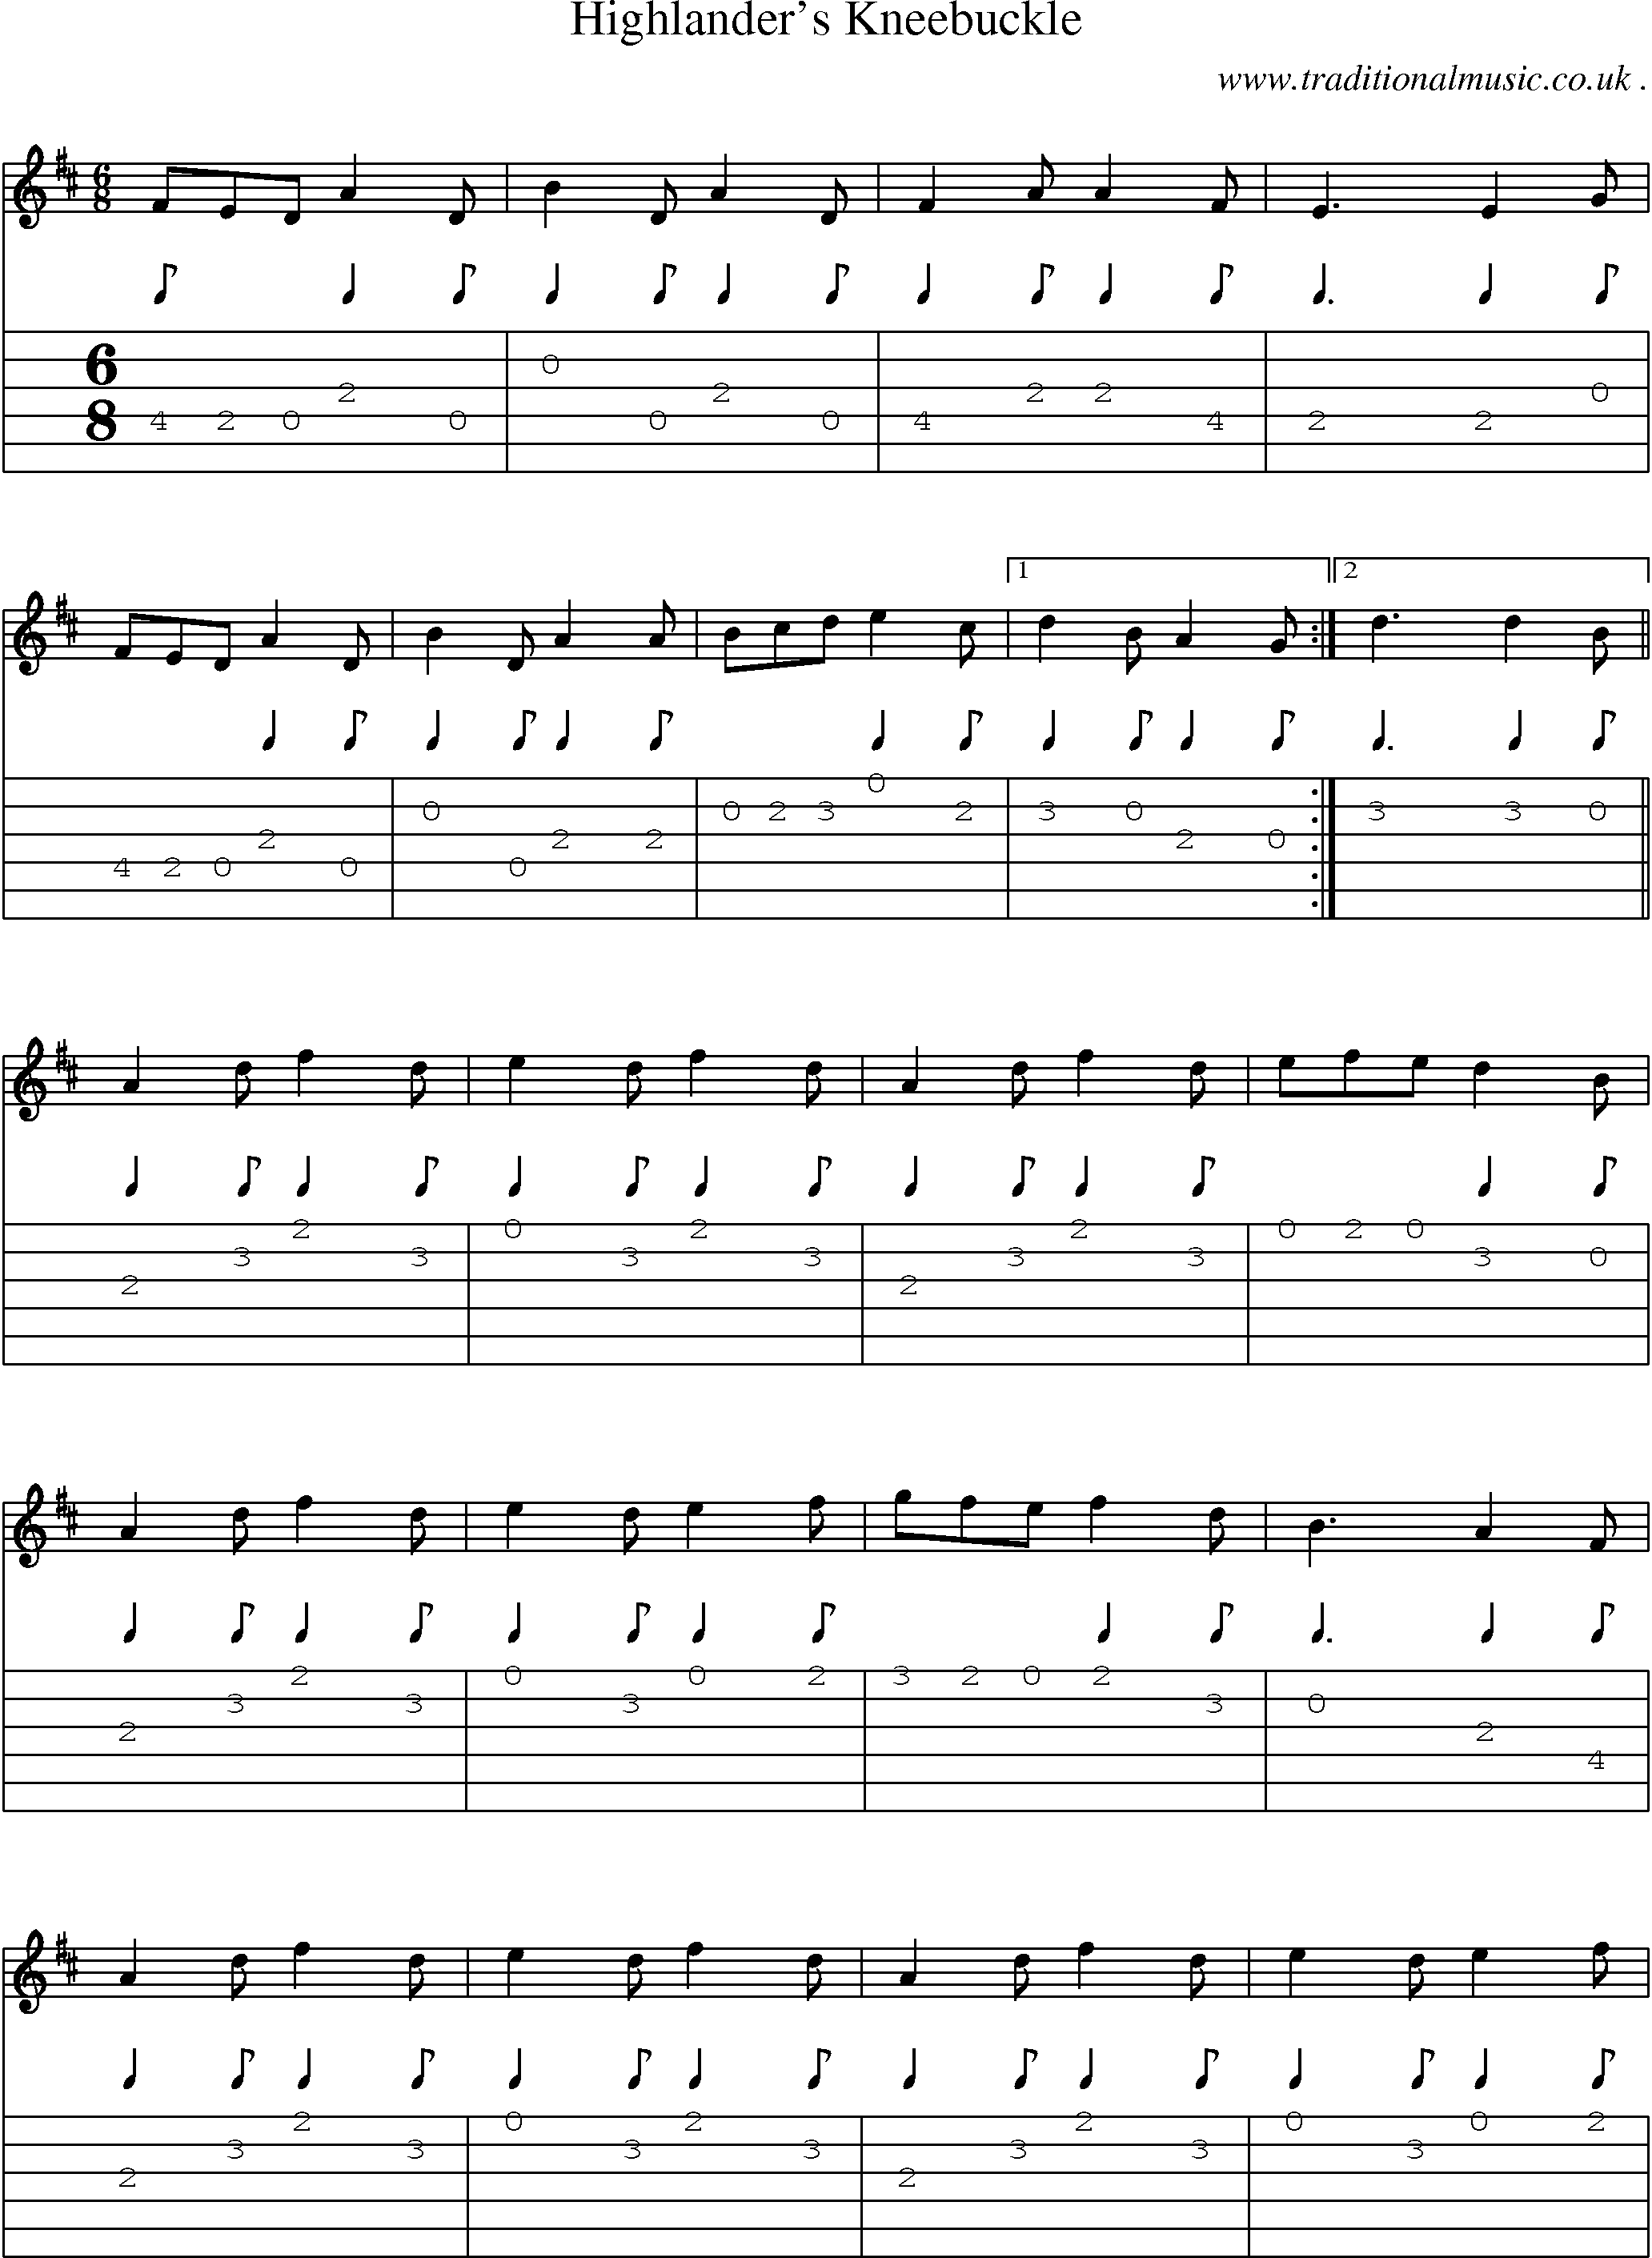 Sheet-Music and Guitar Tabs for Highlanders Kneebuckle